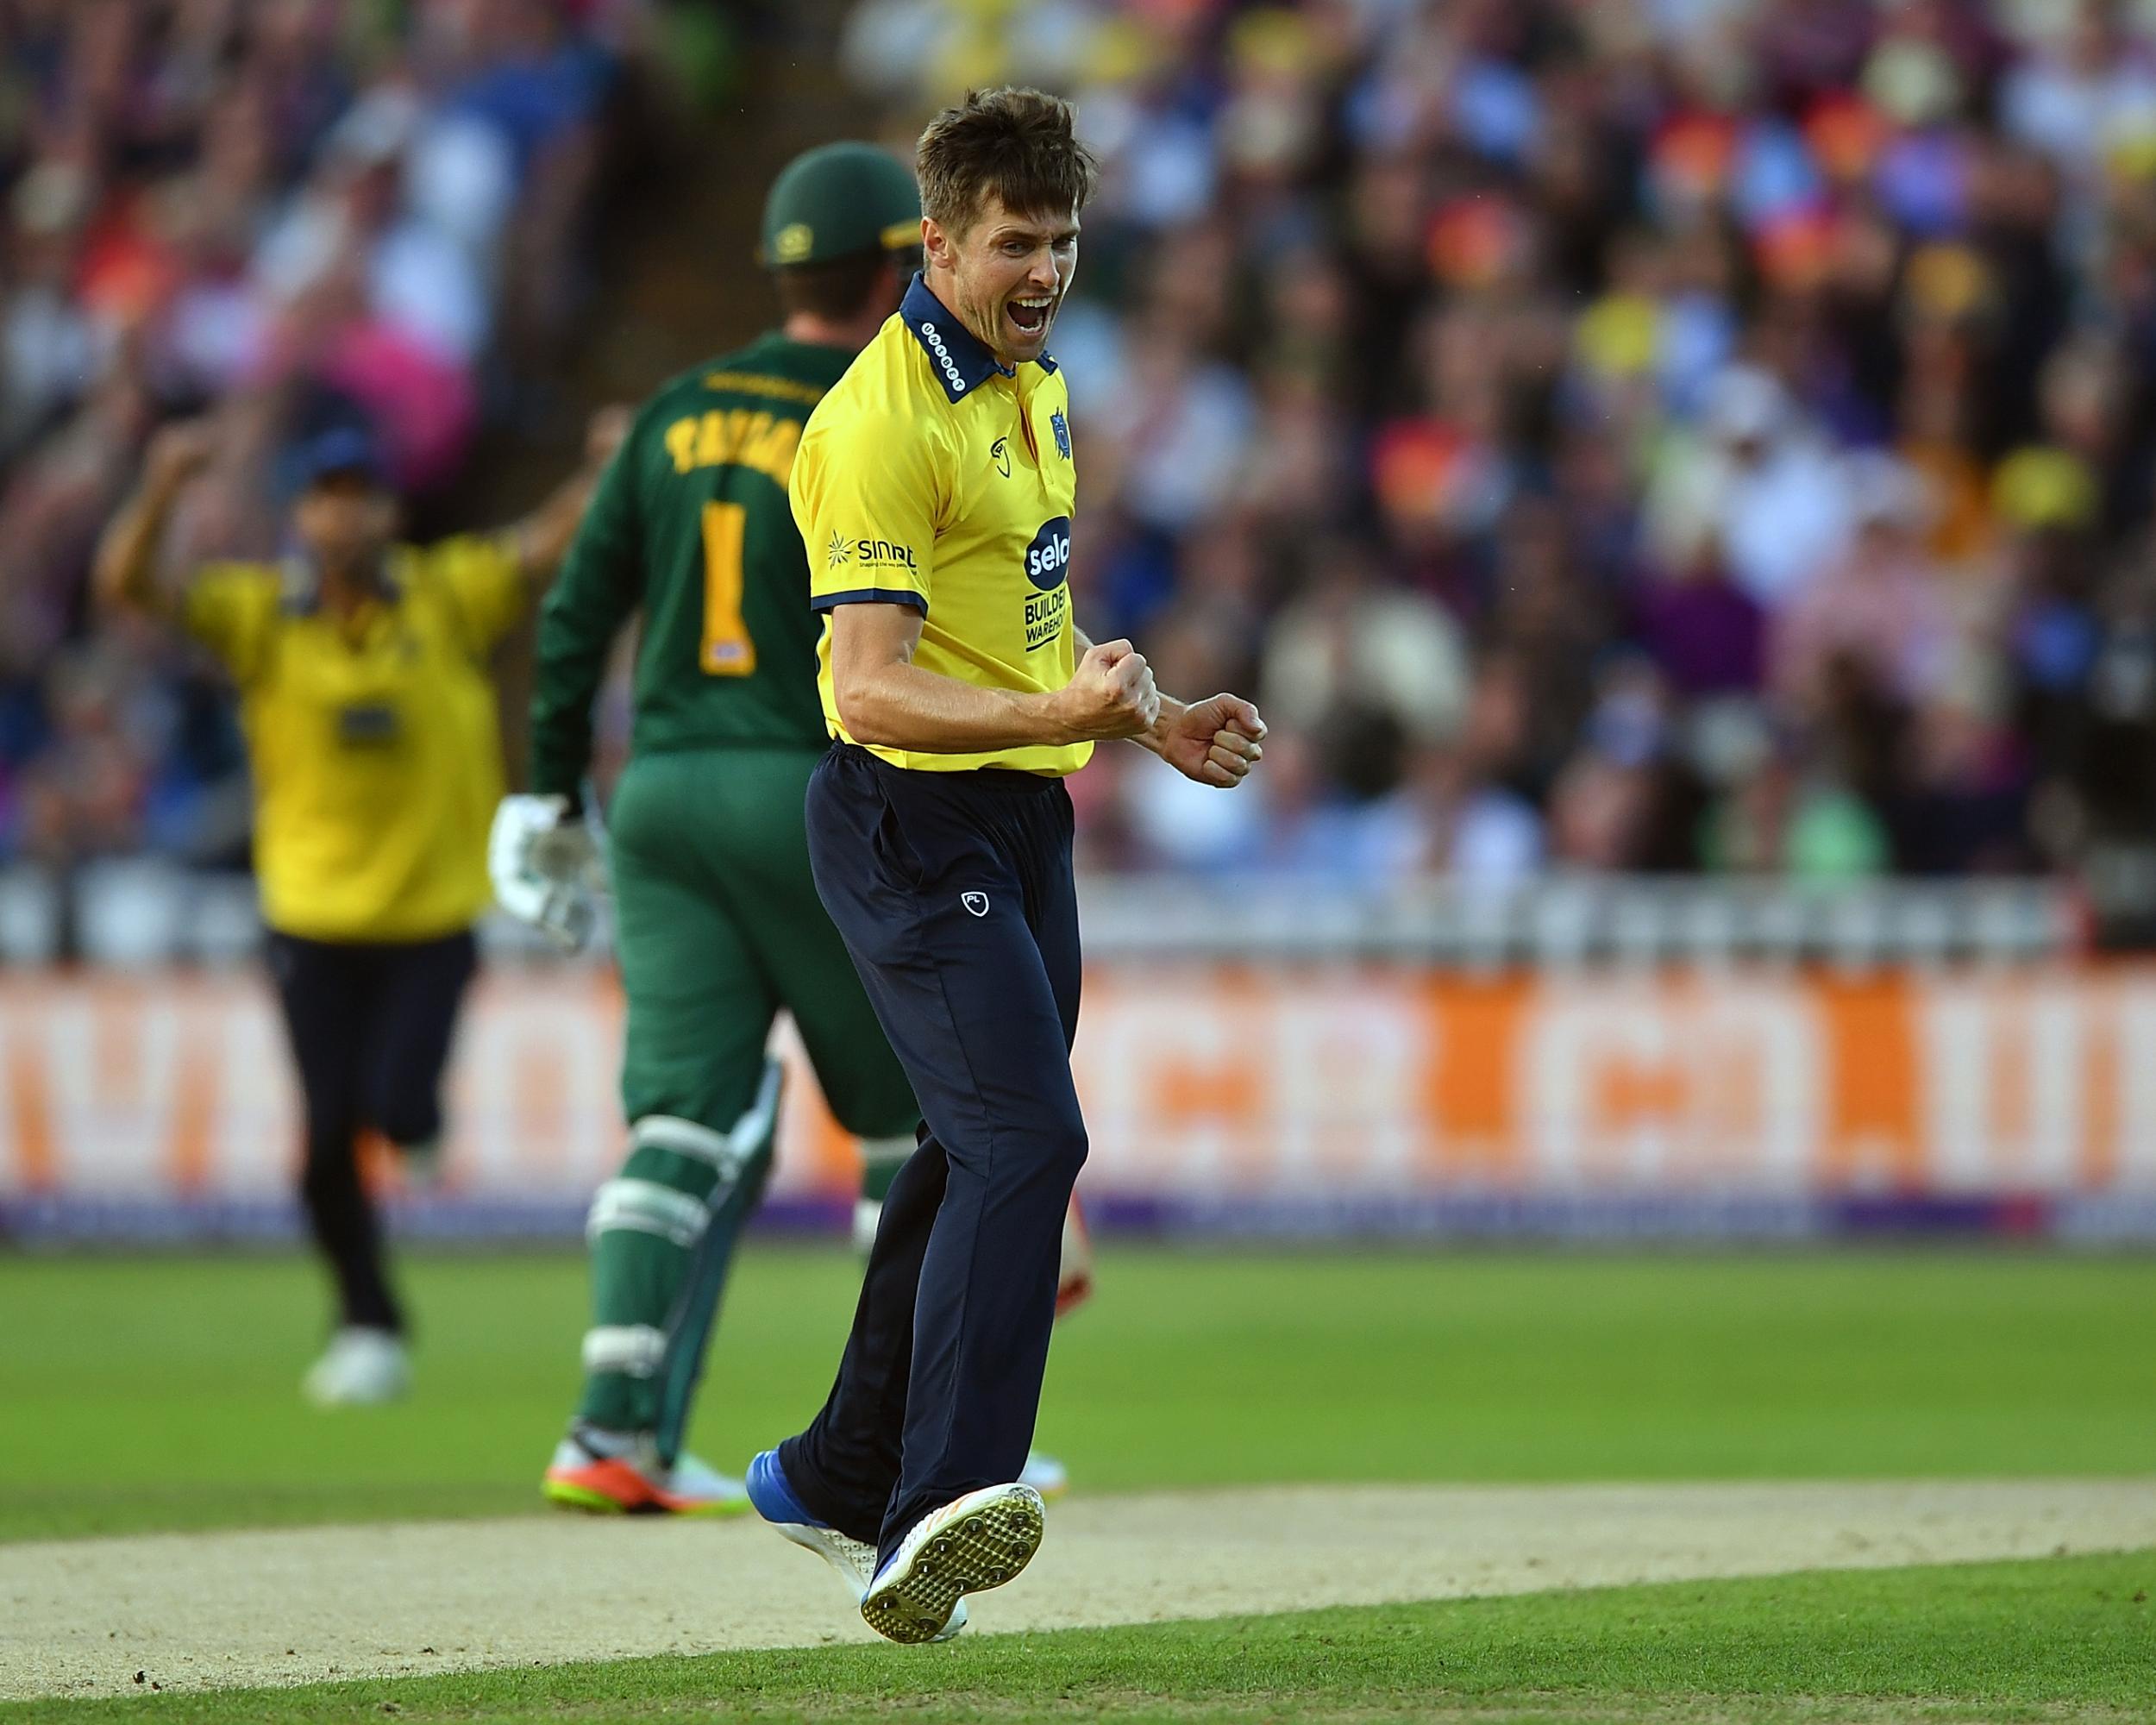 Chris Woakes took three early wickets for the Bears but they could not capitalise